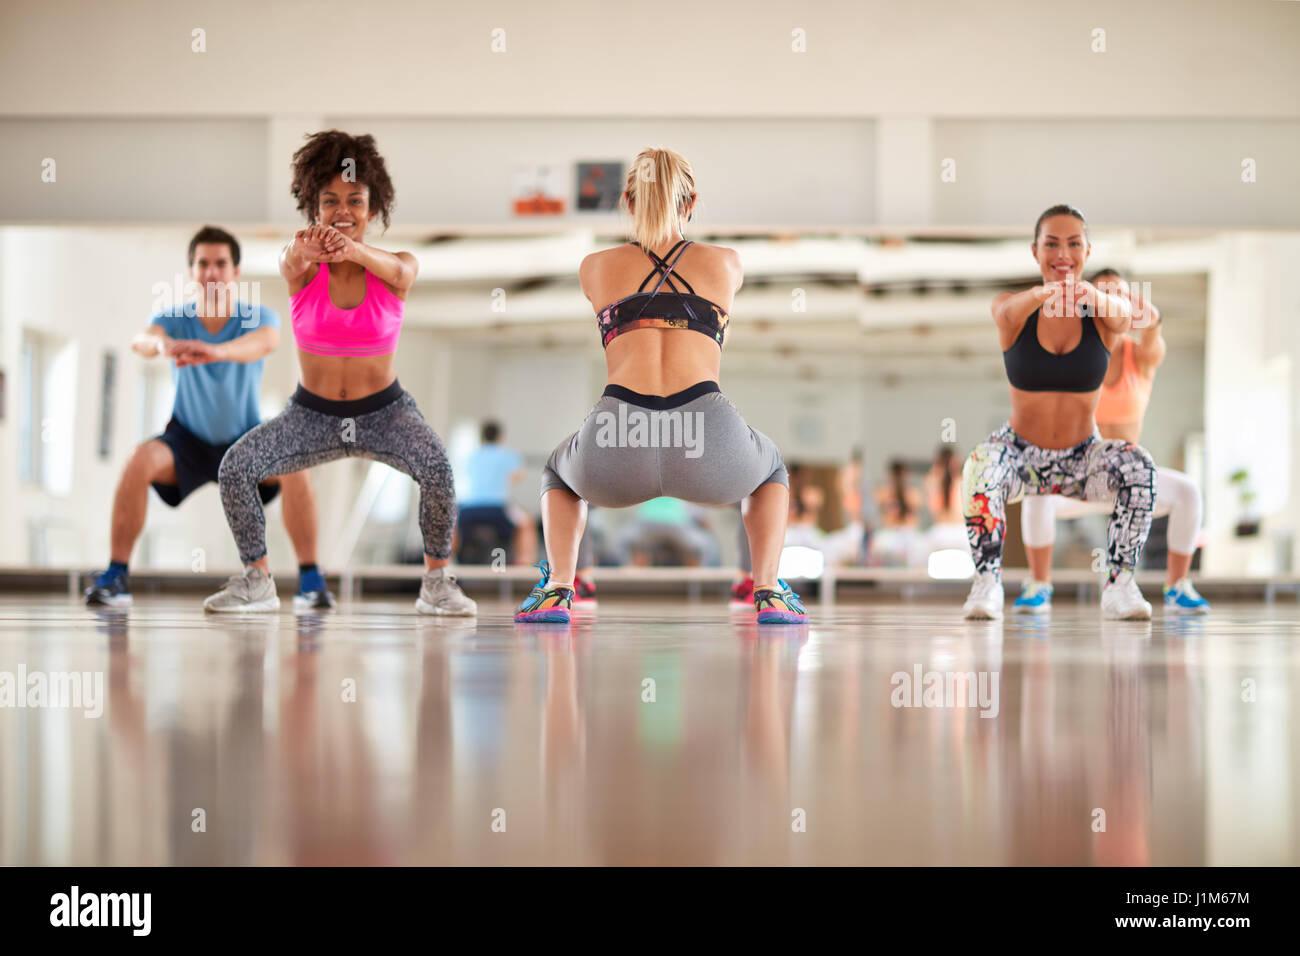 Fitness group warming up in gym with female instructor Stock Photo